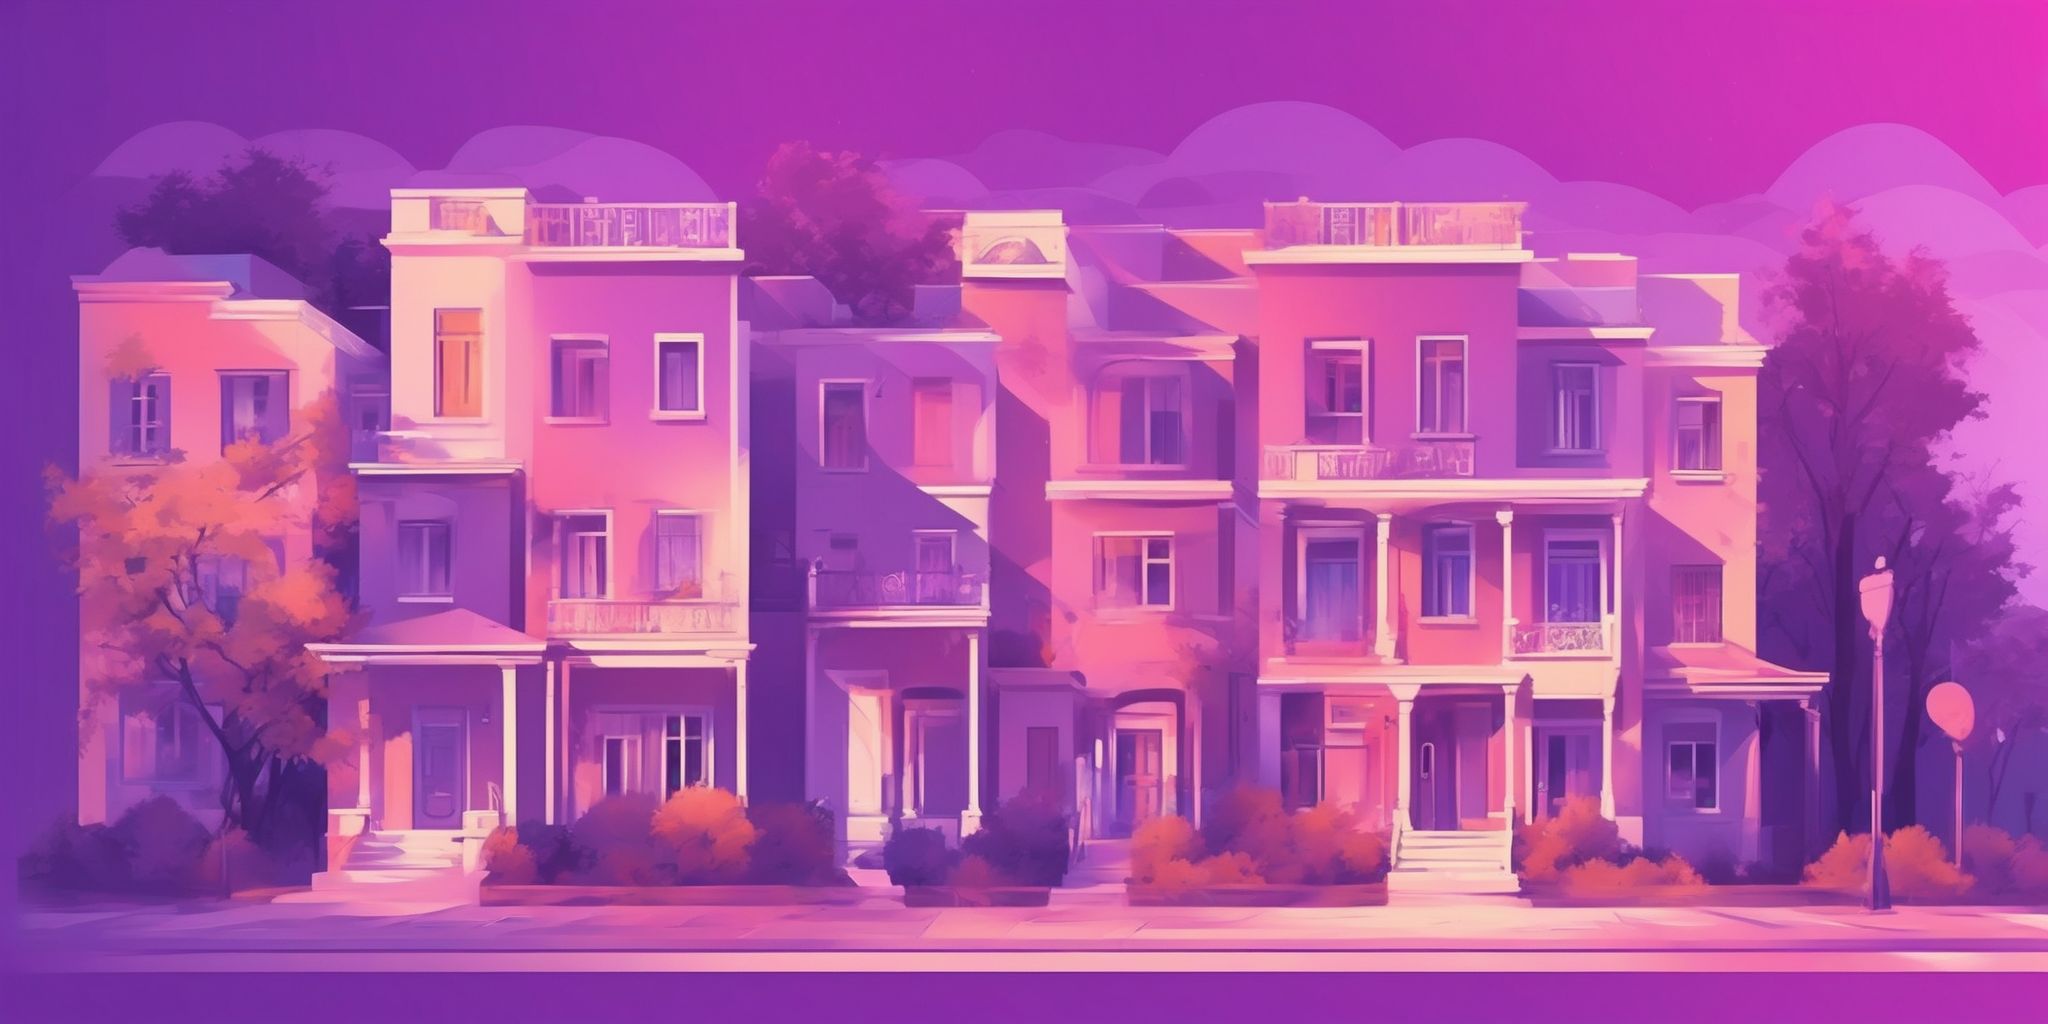 Address in flat illustration style, colorful purple gradient colors